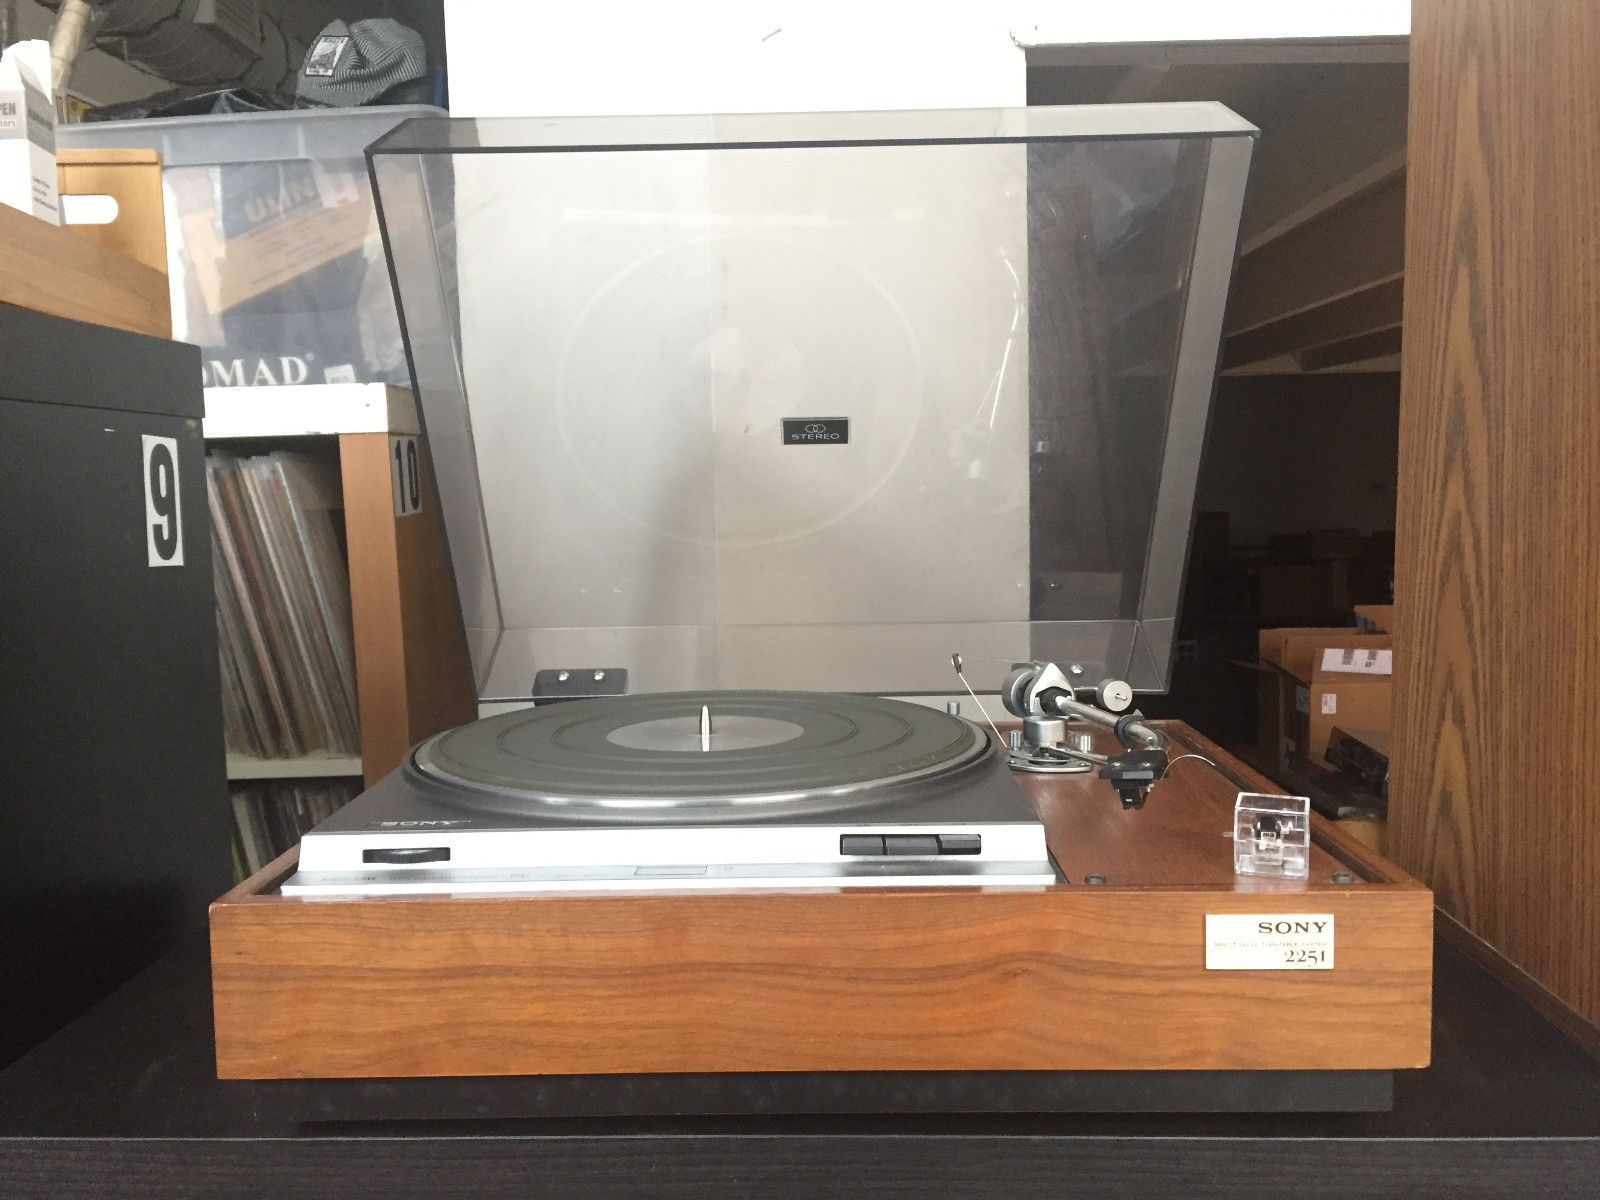 Vintage Sony PS 2251 Direct Drive Turntable Record Player With Shure SME 3009 Tonearm & Micro Acoustics MA 2002 Needle Stylus